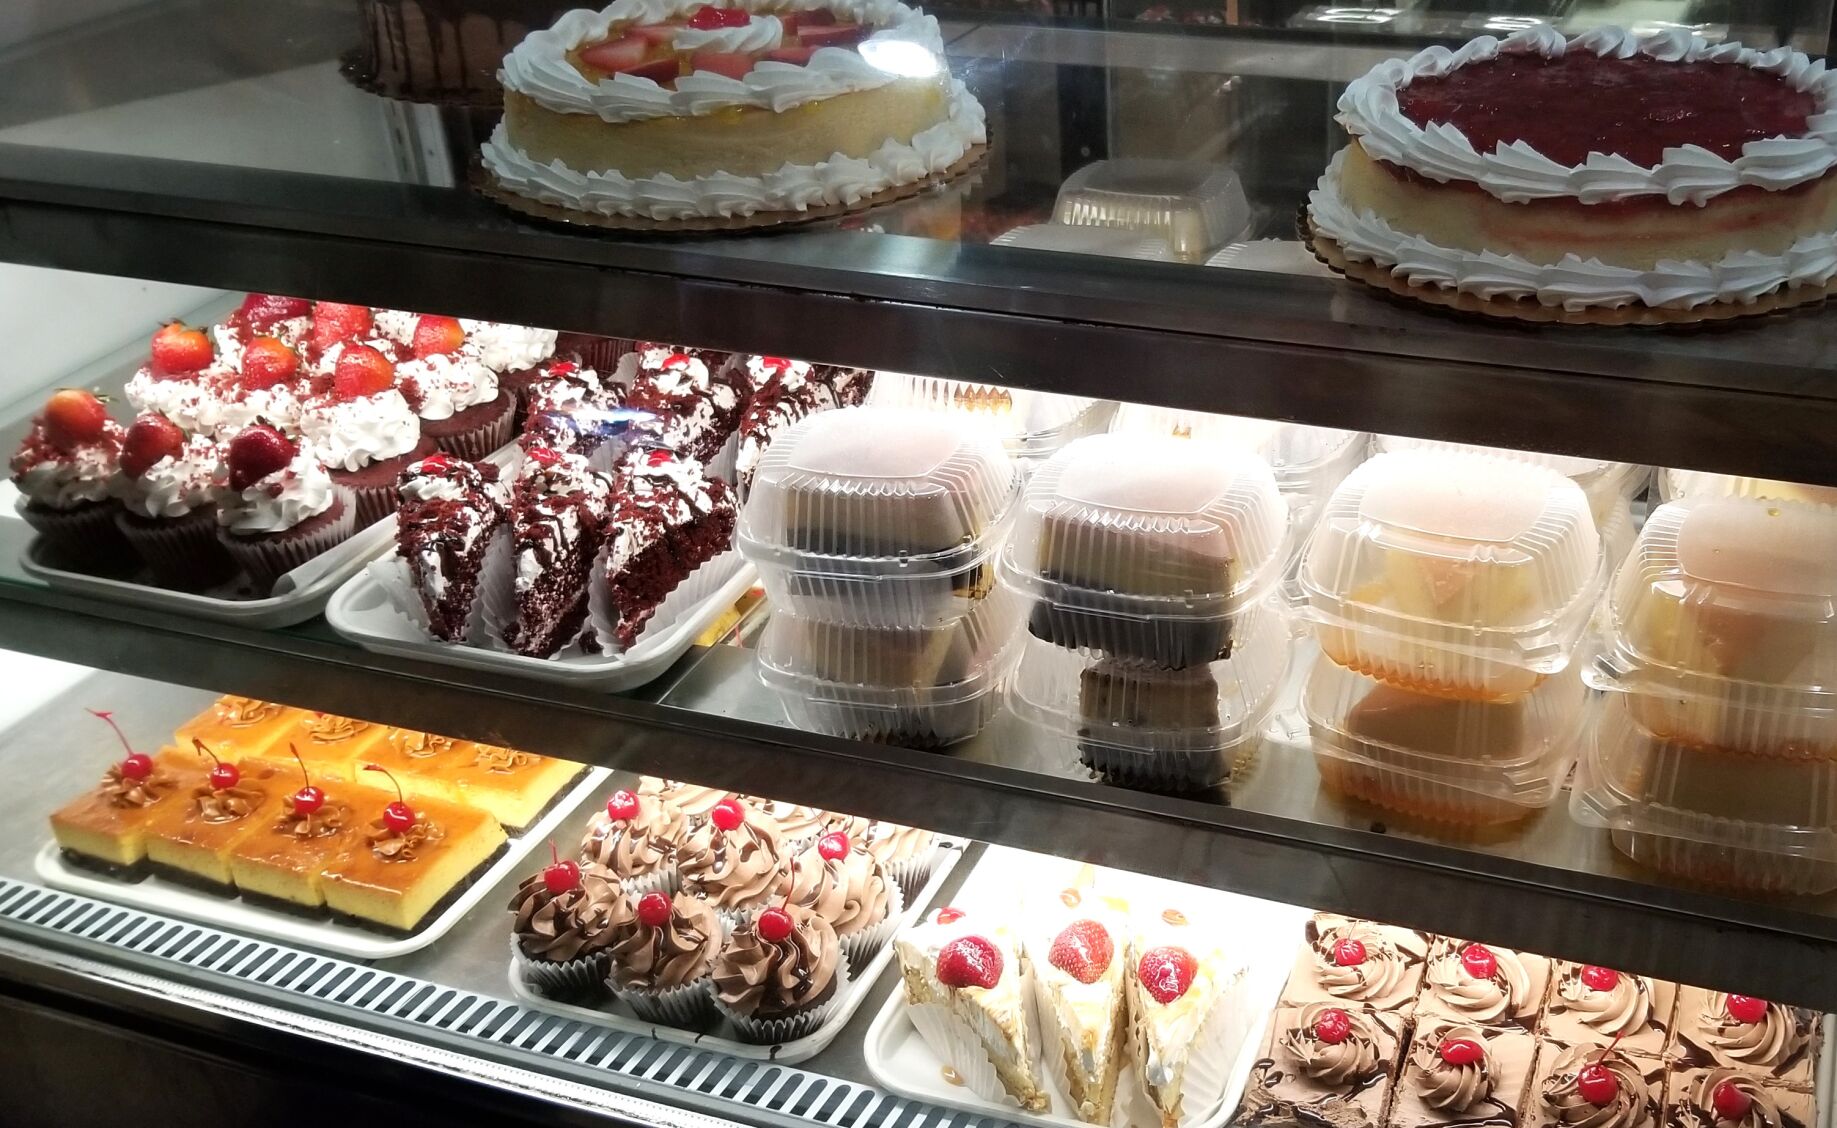 5 Magnificent Cakes The Best Bakery Paramus NJ Offers